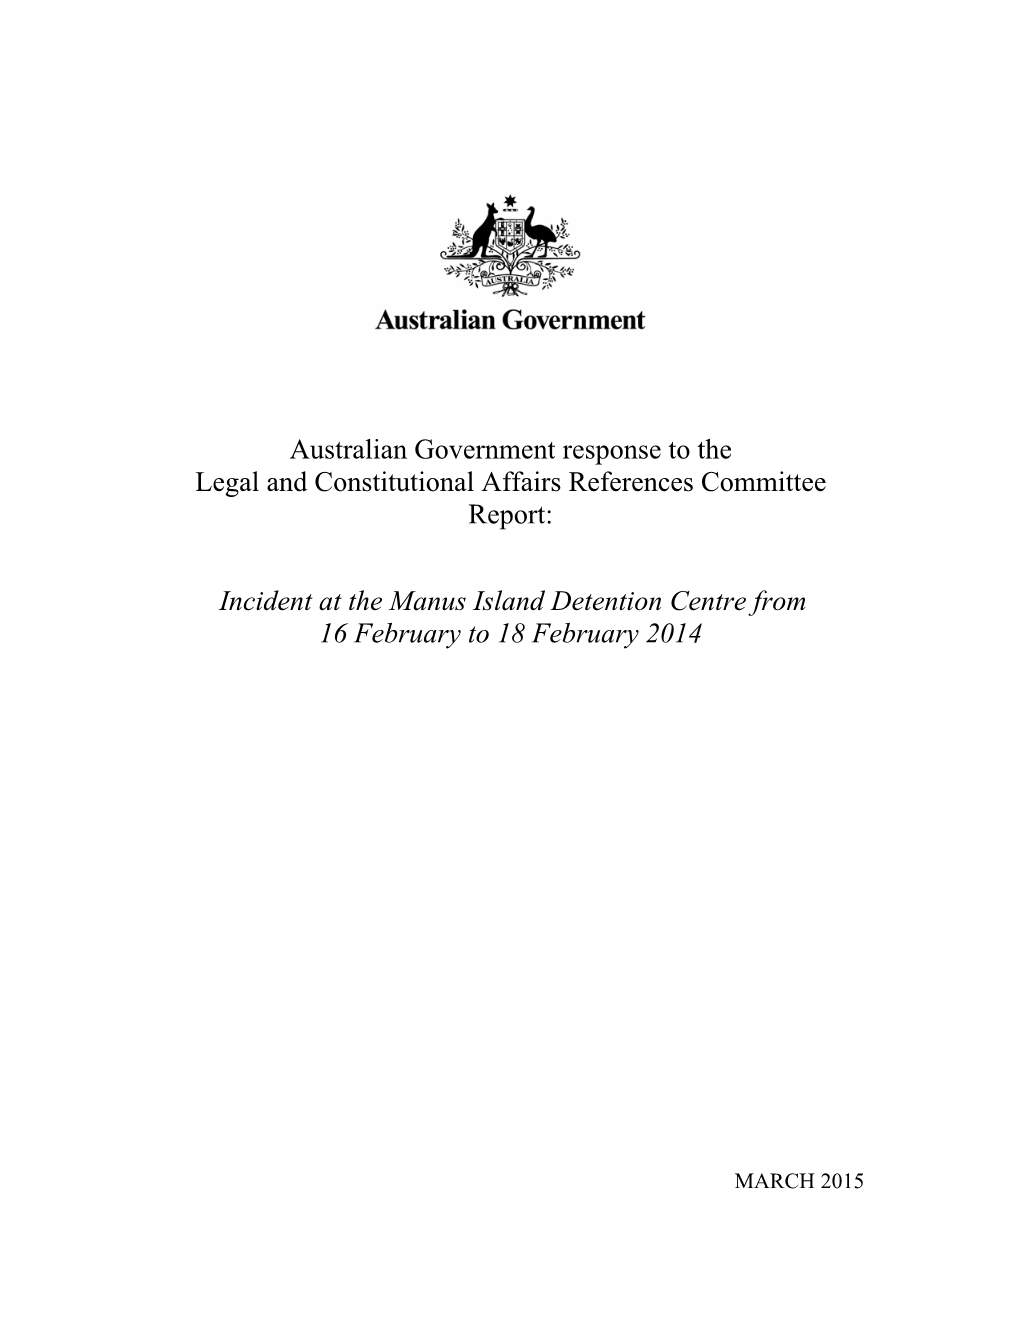 Australian Government Response to the Legal and Constitutional Affairs References Committee Report